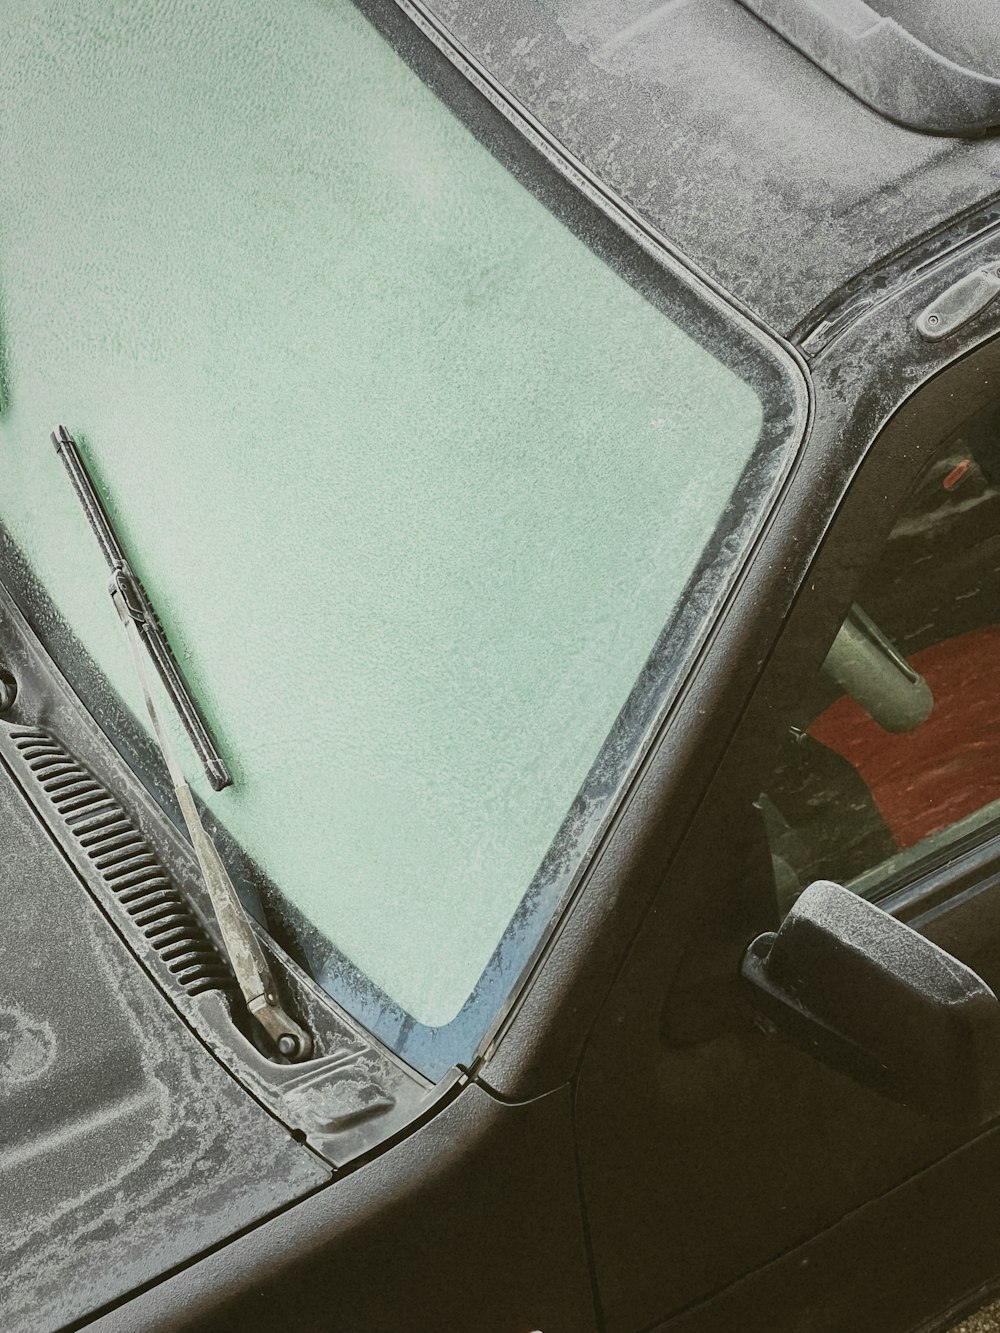 the windshield of a car that has been covered in ice